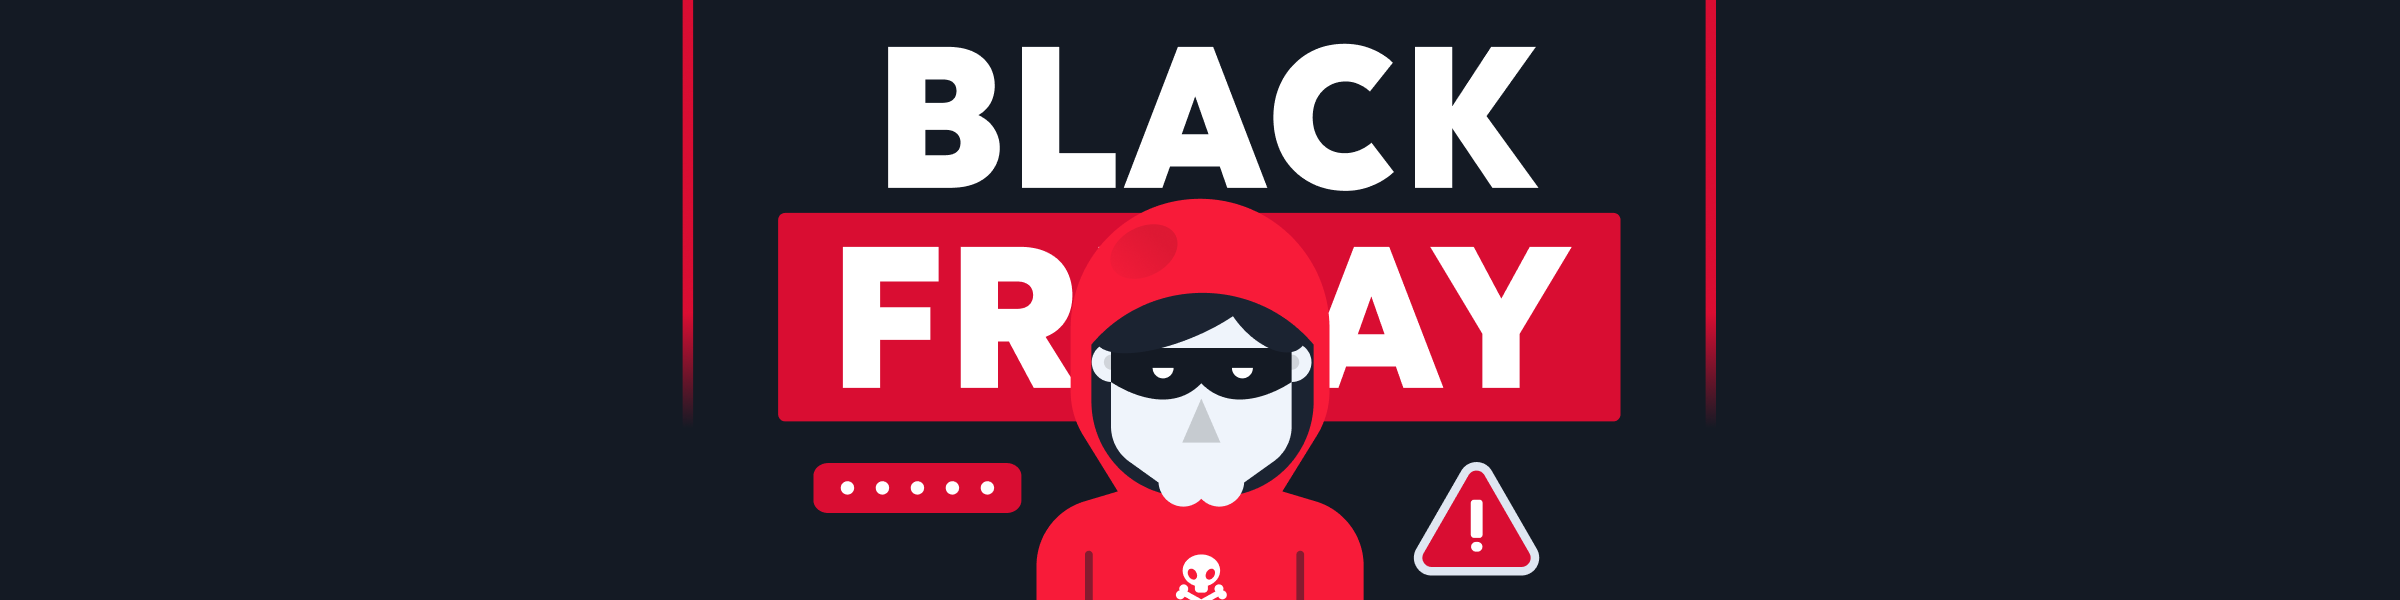 don't let email scams spoil your black friday